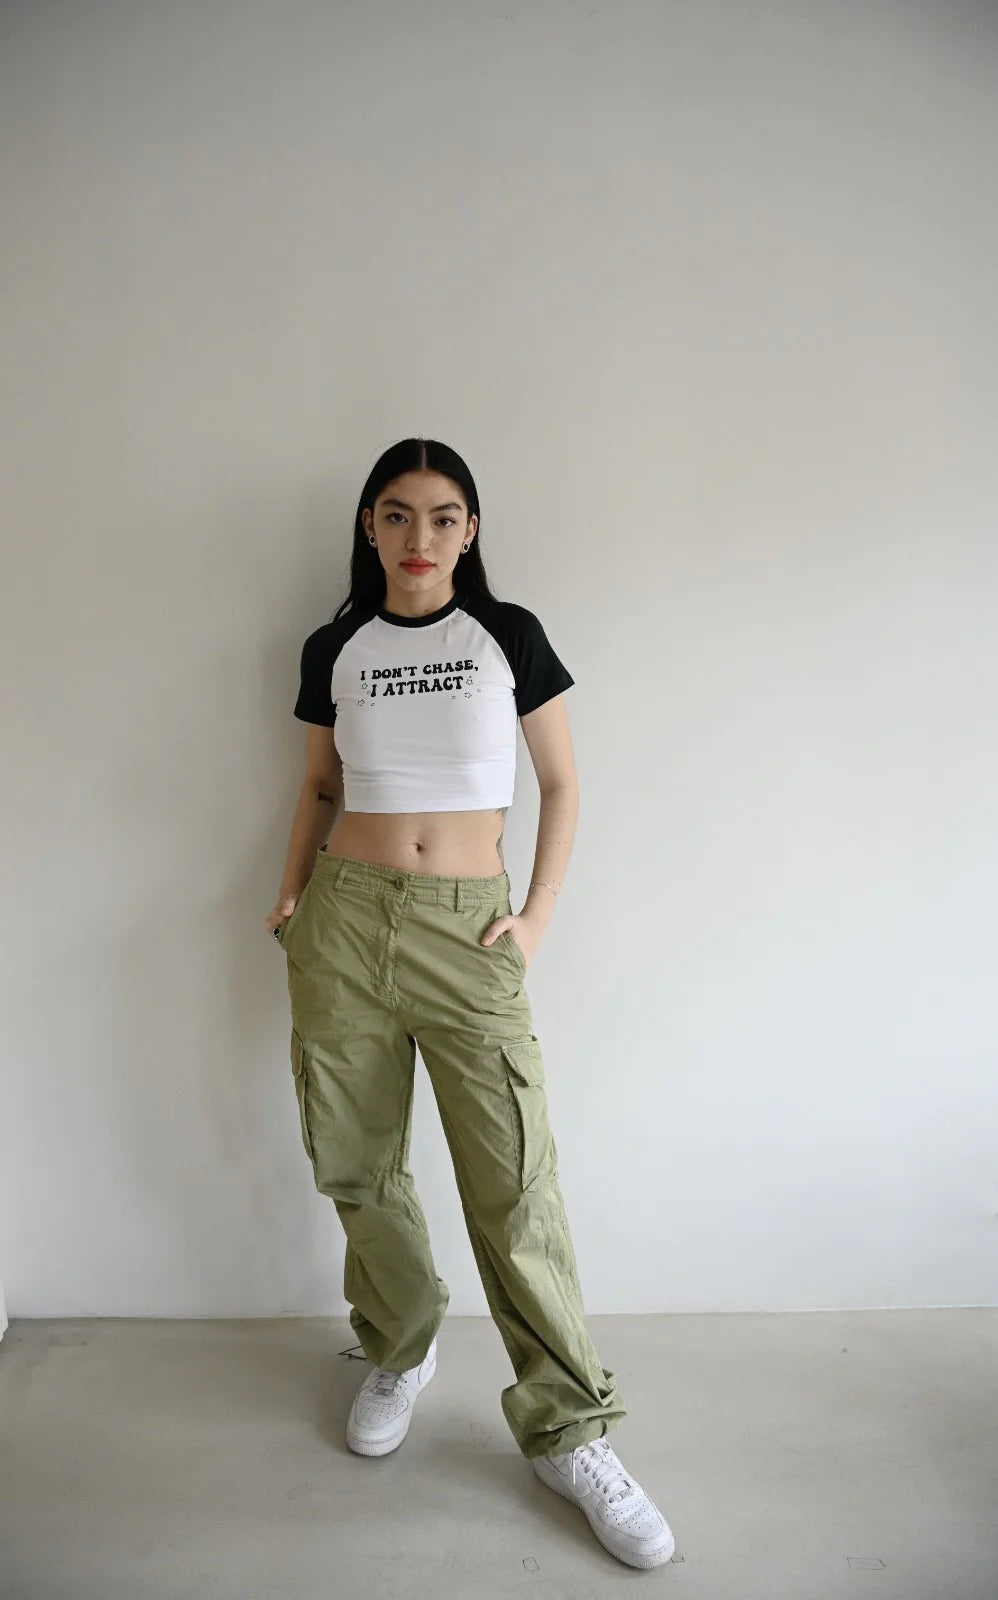 Aly Good Vibes - I Attract Crop Tee